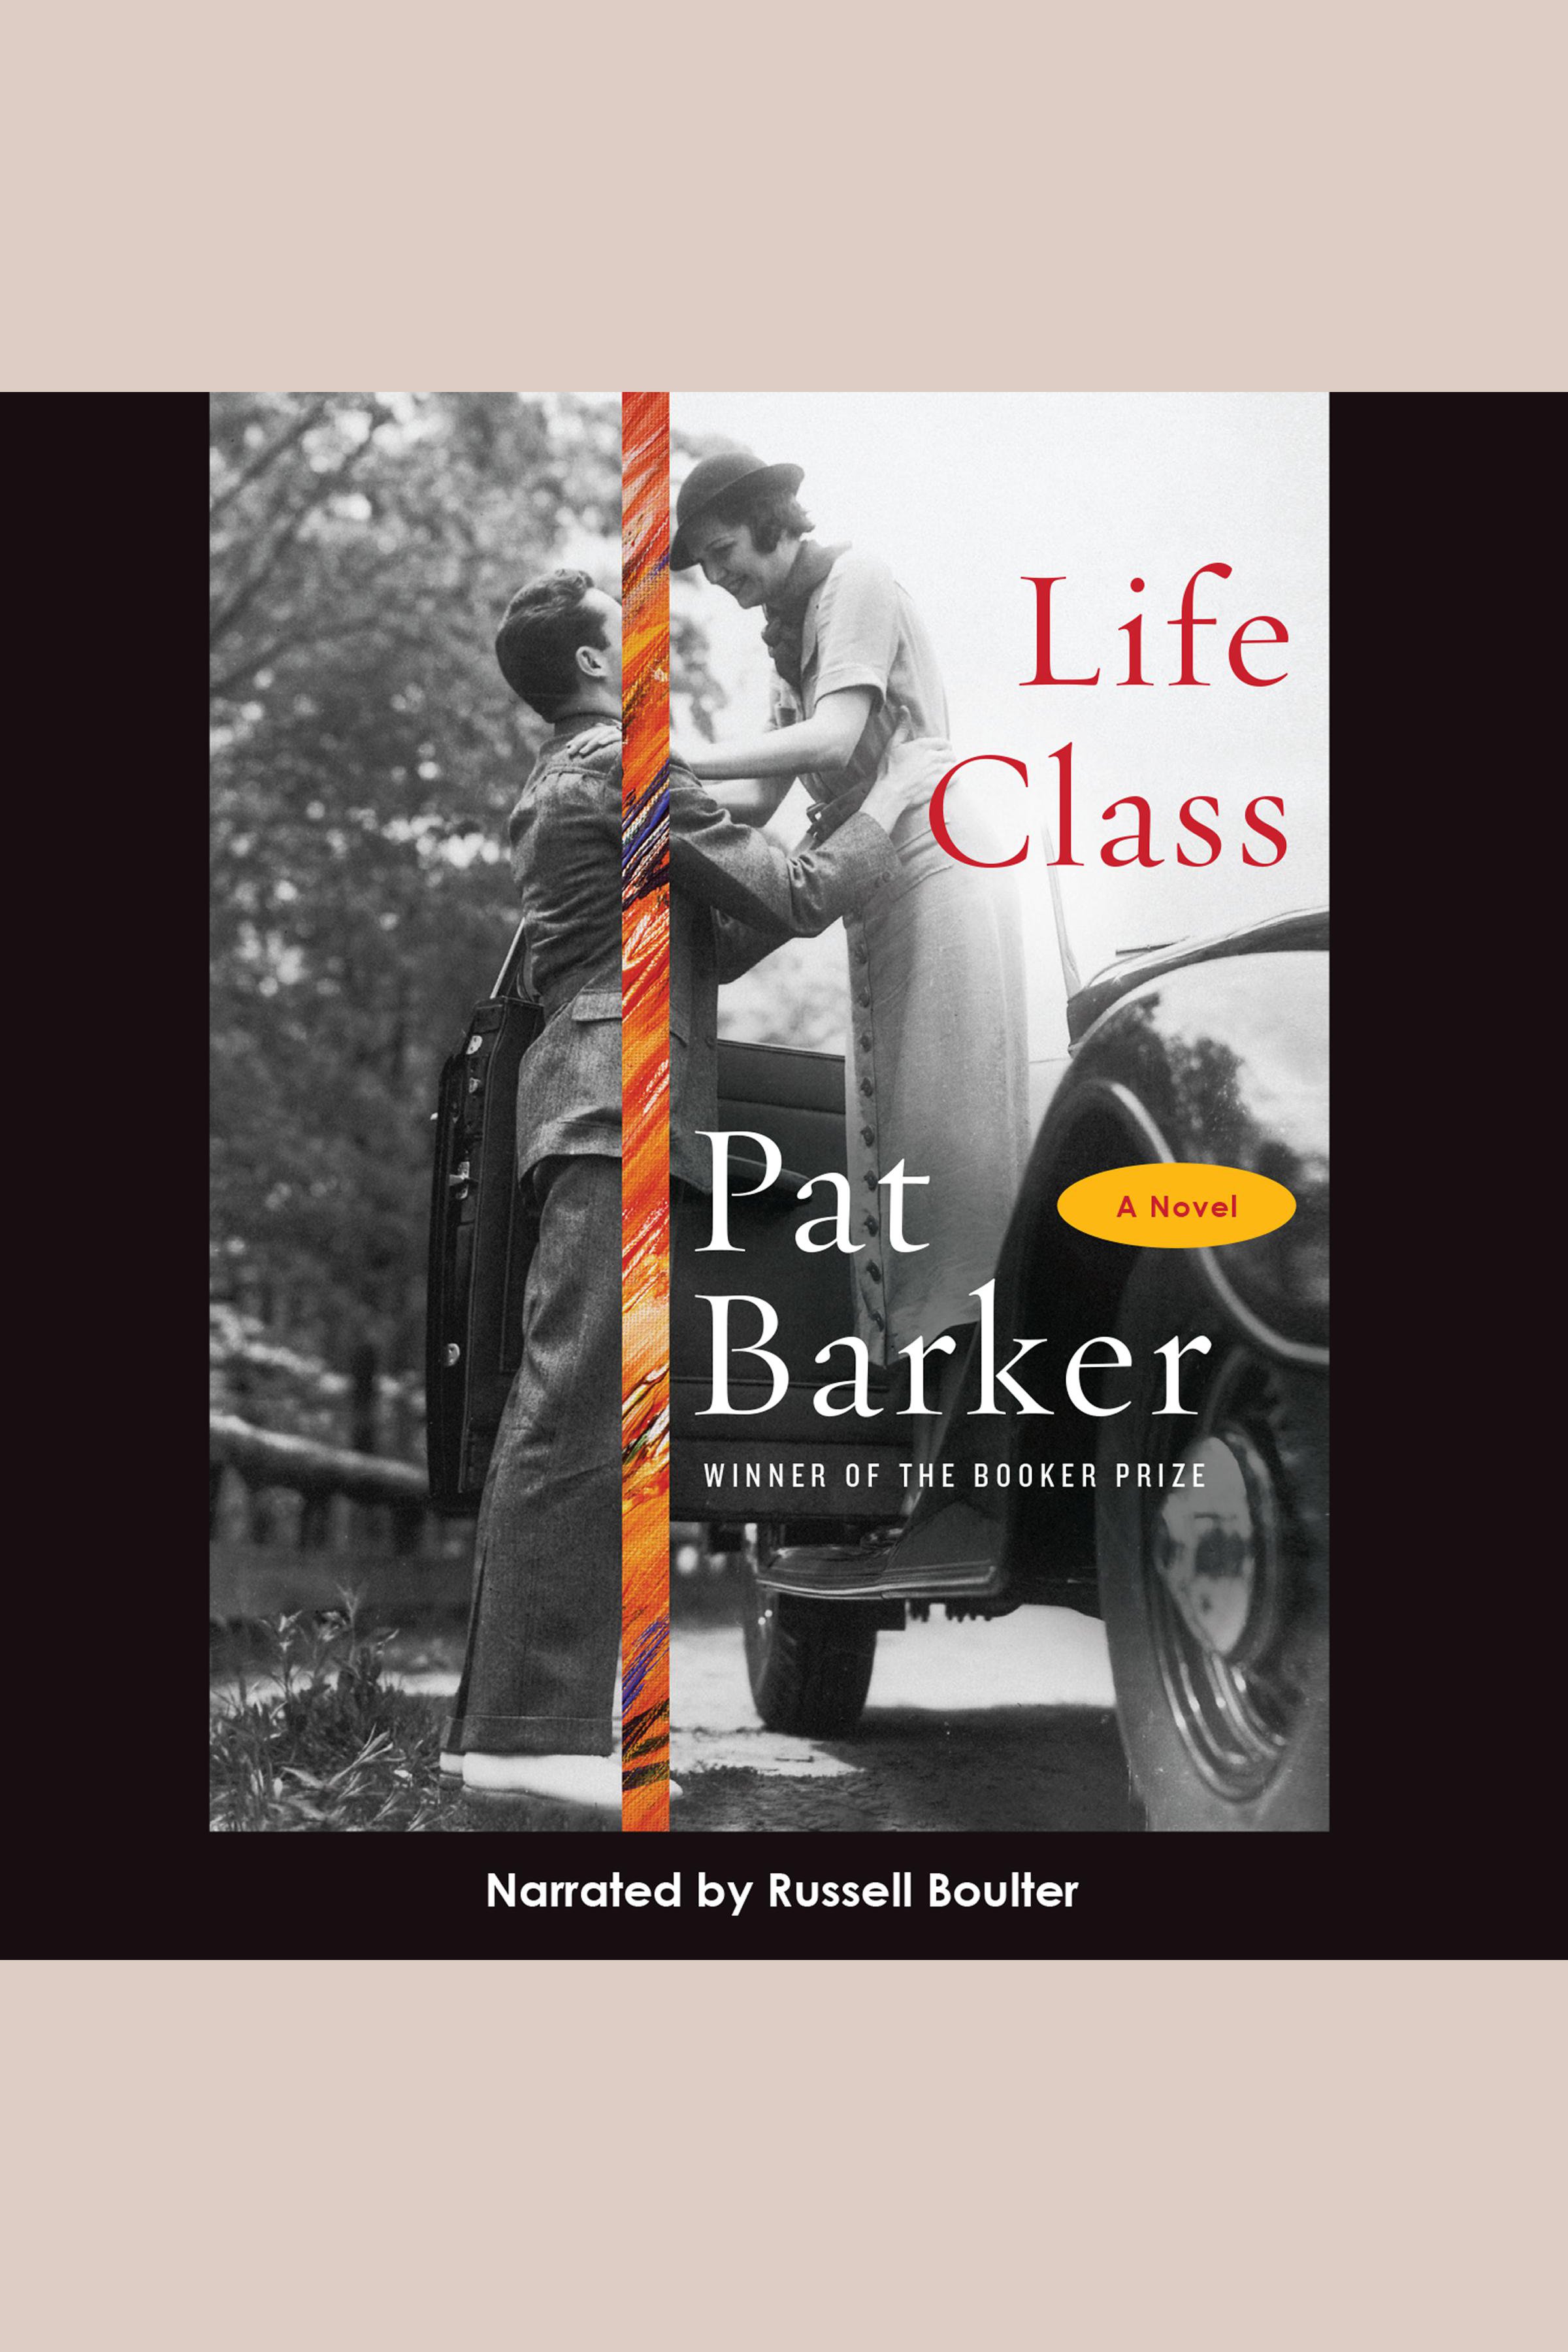 Life class cover image